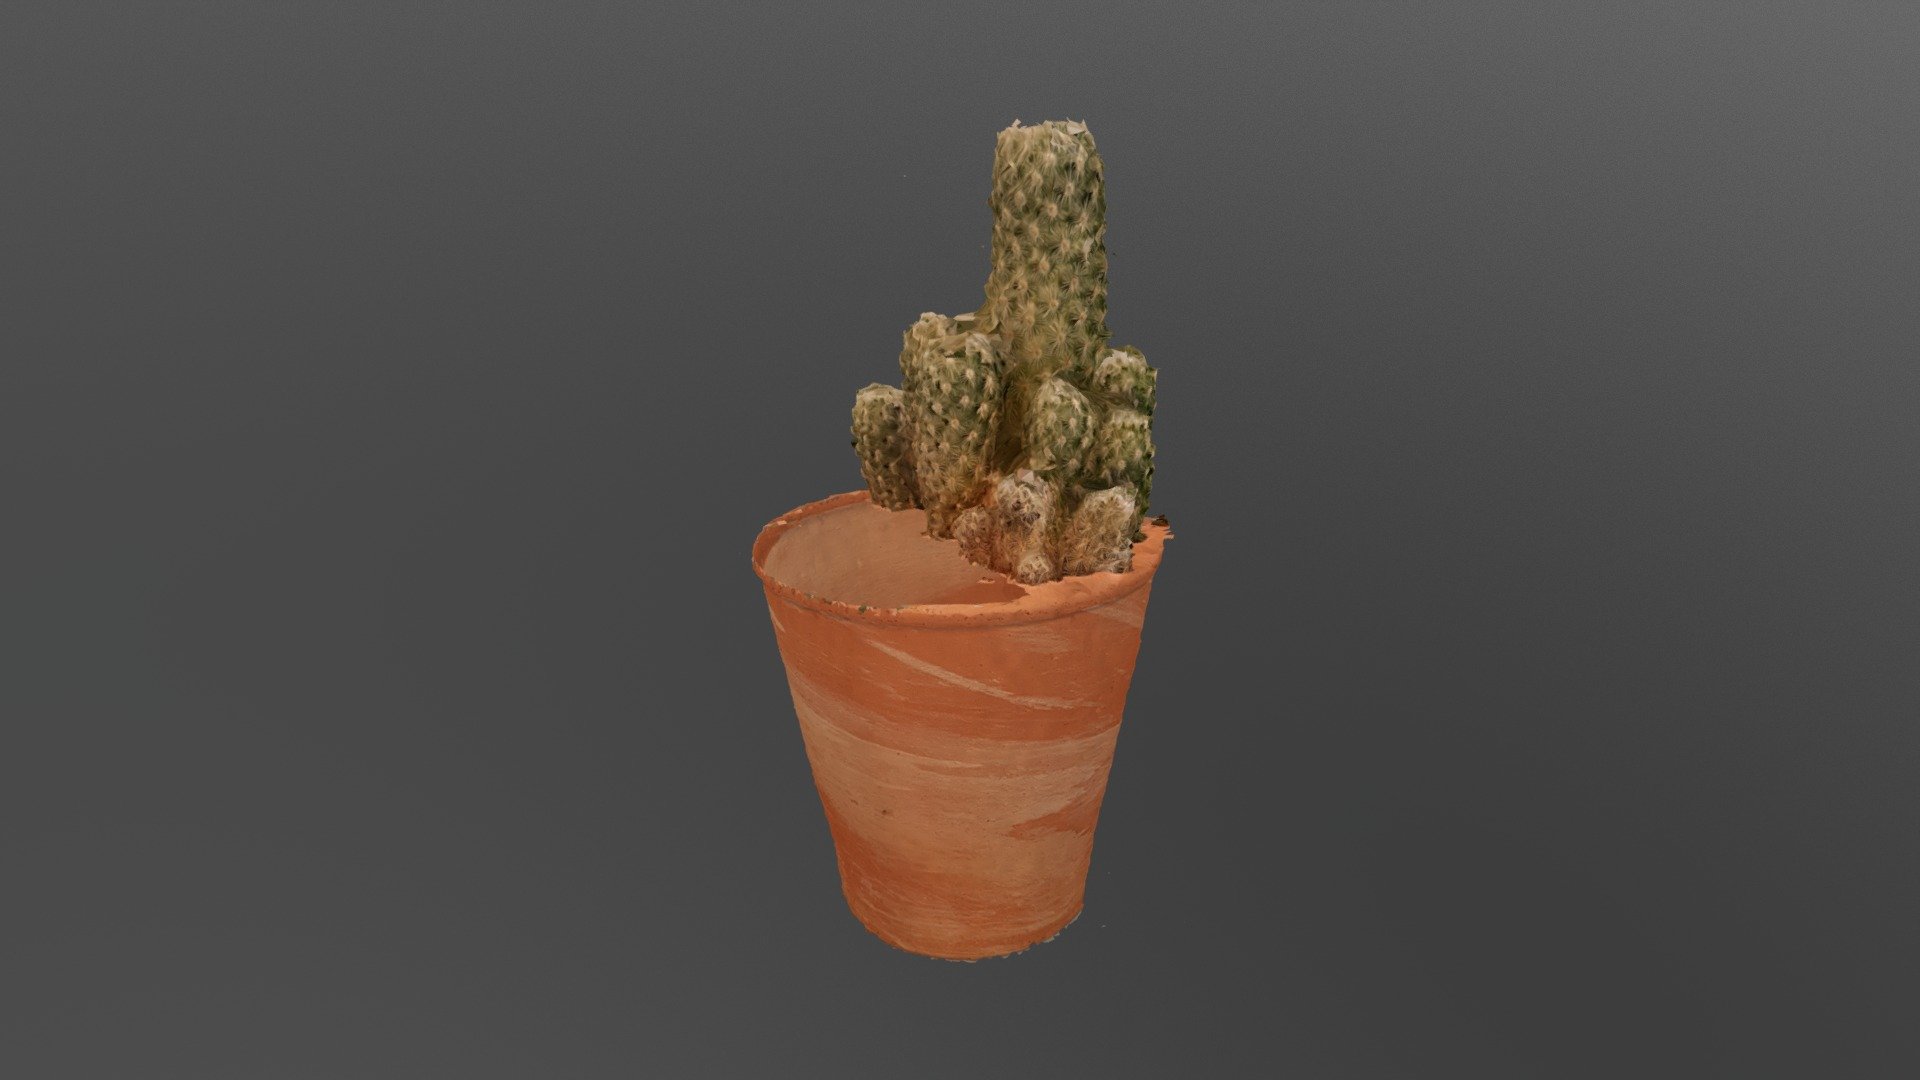 My impressive 3D model from photos